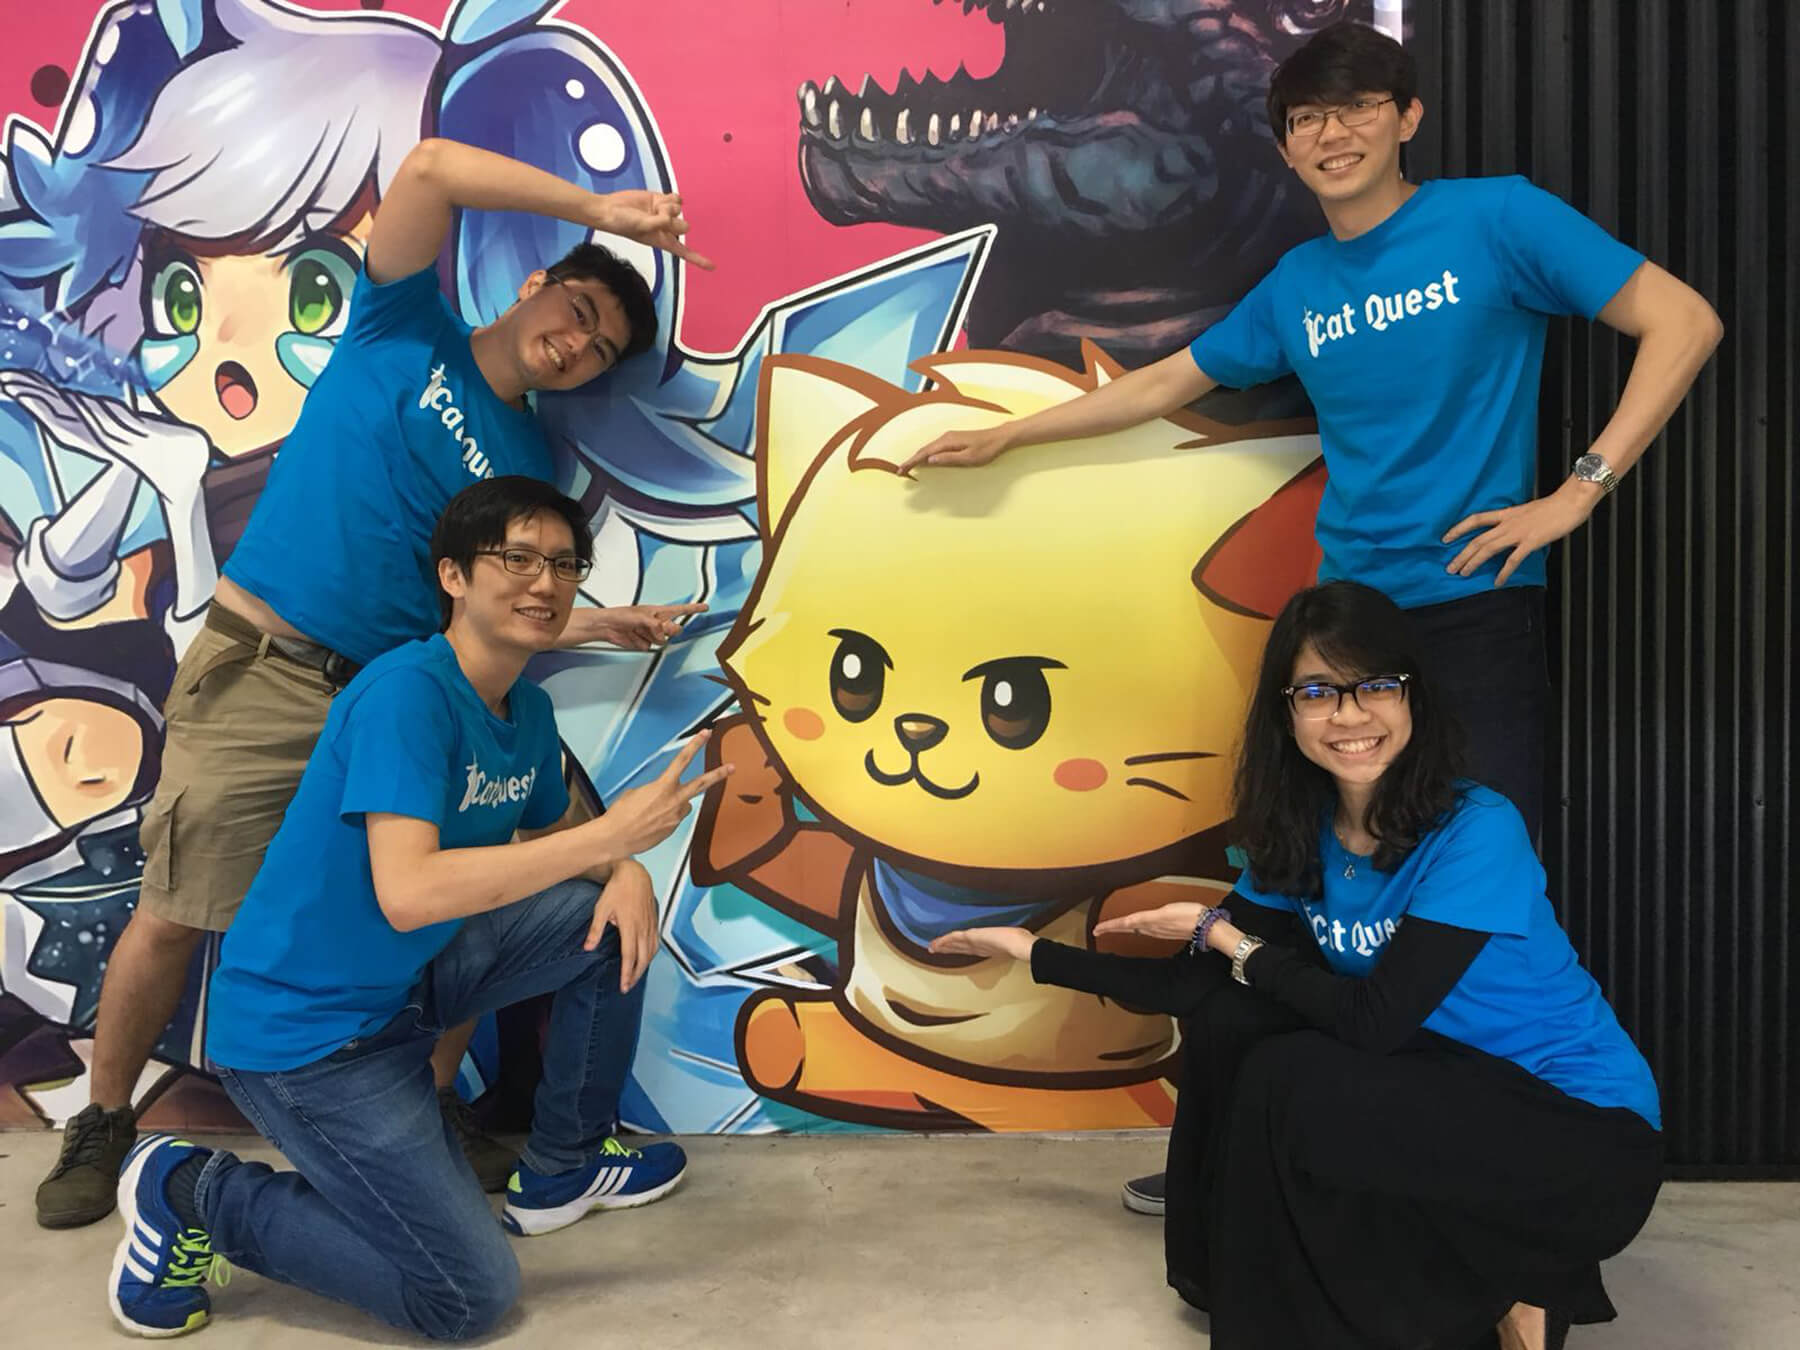 Four Gentlebros team members wearing Cat Quest T-shirts pose in front of a Cat Quest backdrop.